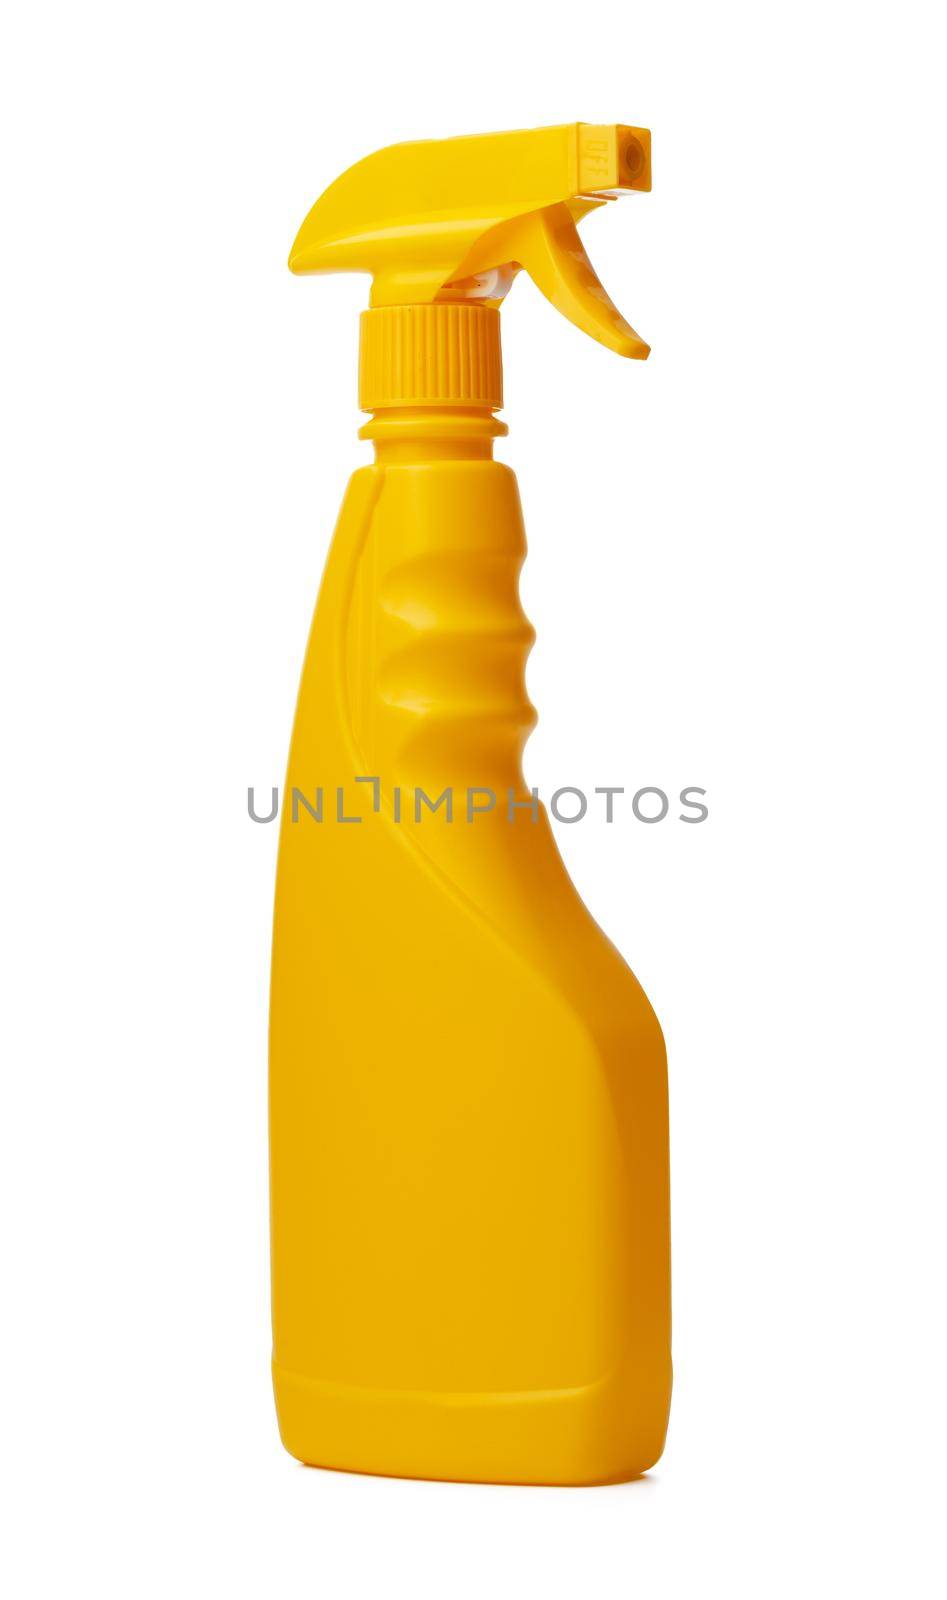 Cleaning spray bottle isolated on white background by Fabrikasimf